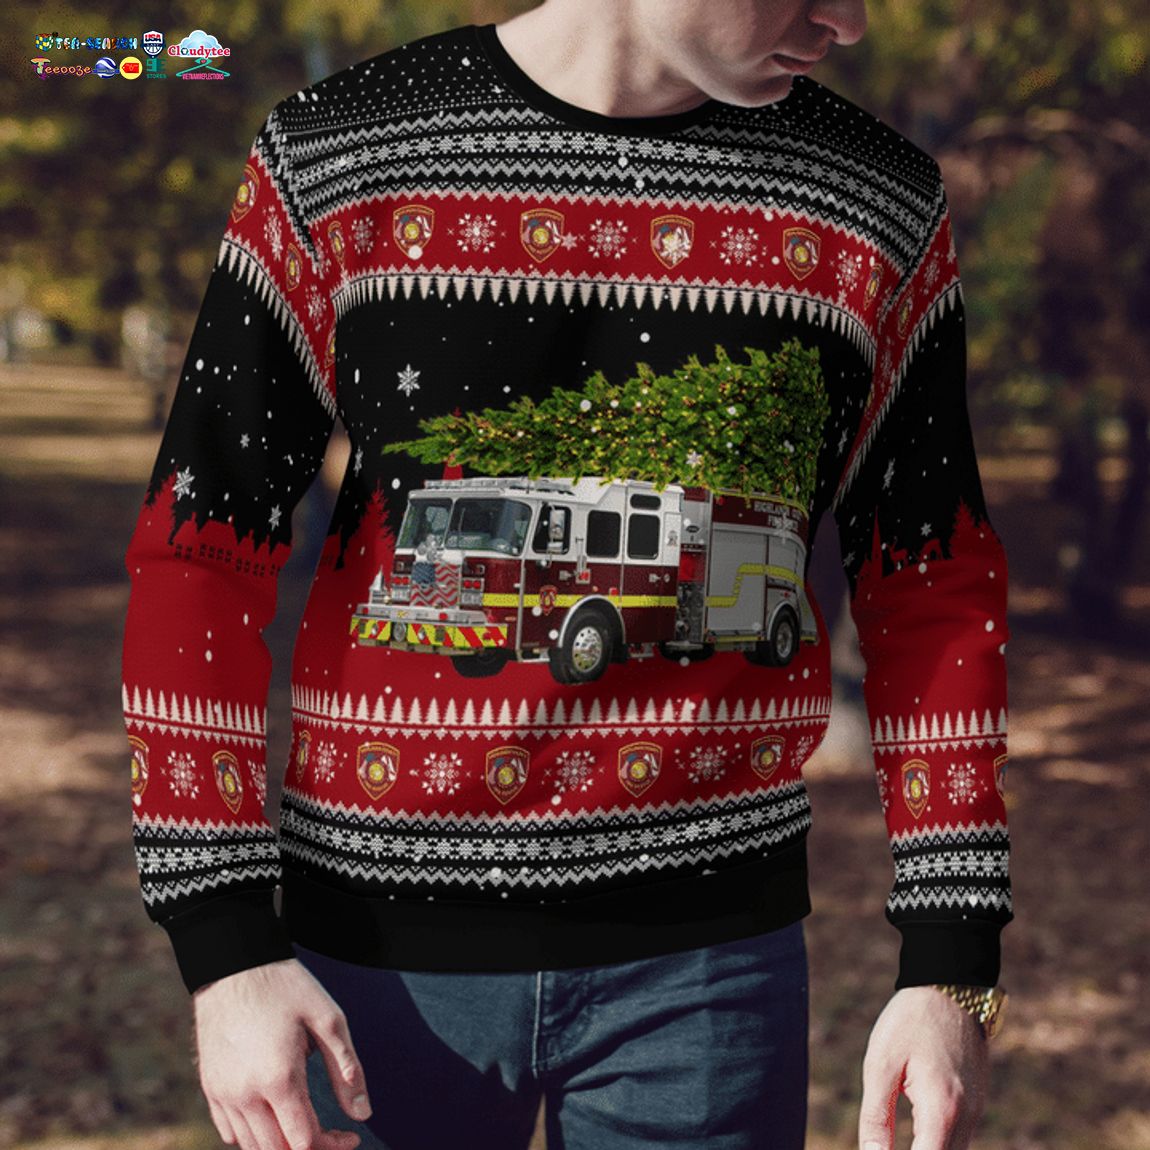 Florida Highlands County Fire Rescue 3D Christmas Sweater - Saleoff